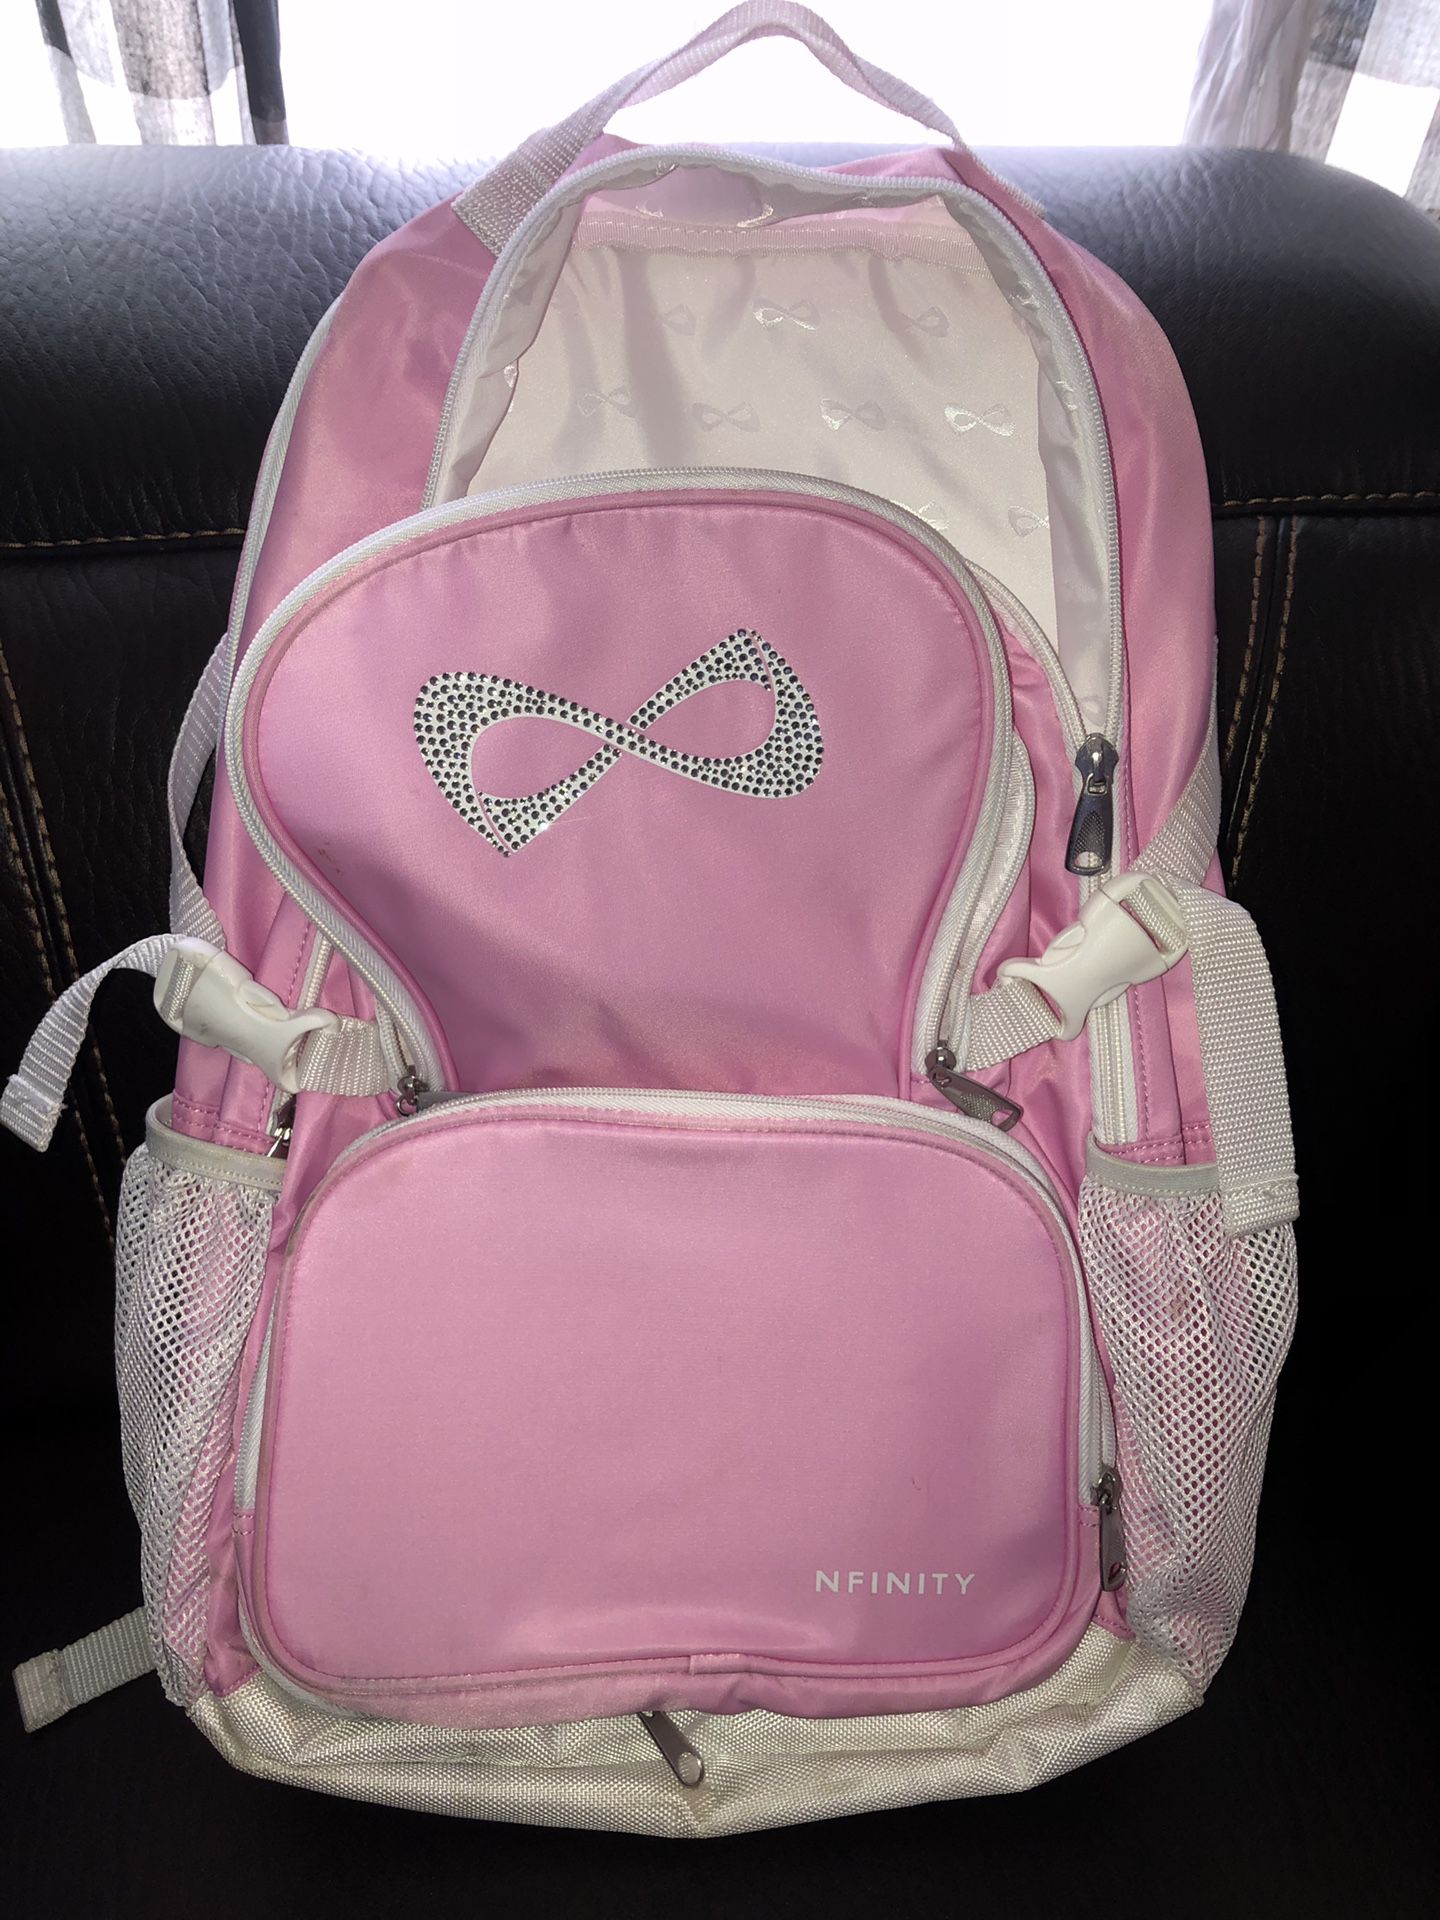 Pink Infinity Cheer Backpack for Sale in Lakeside, CA - OfferUp